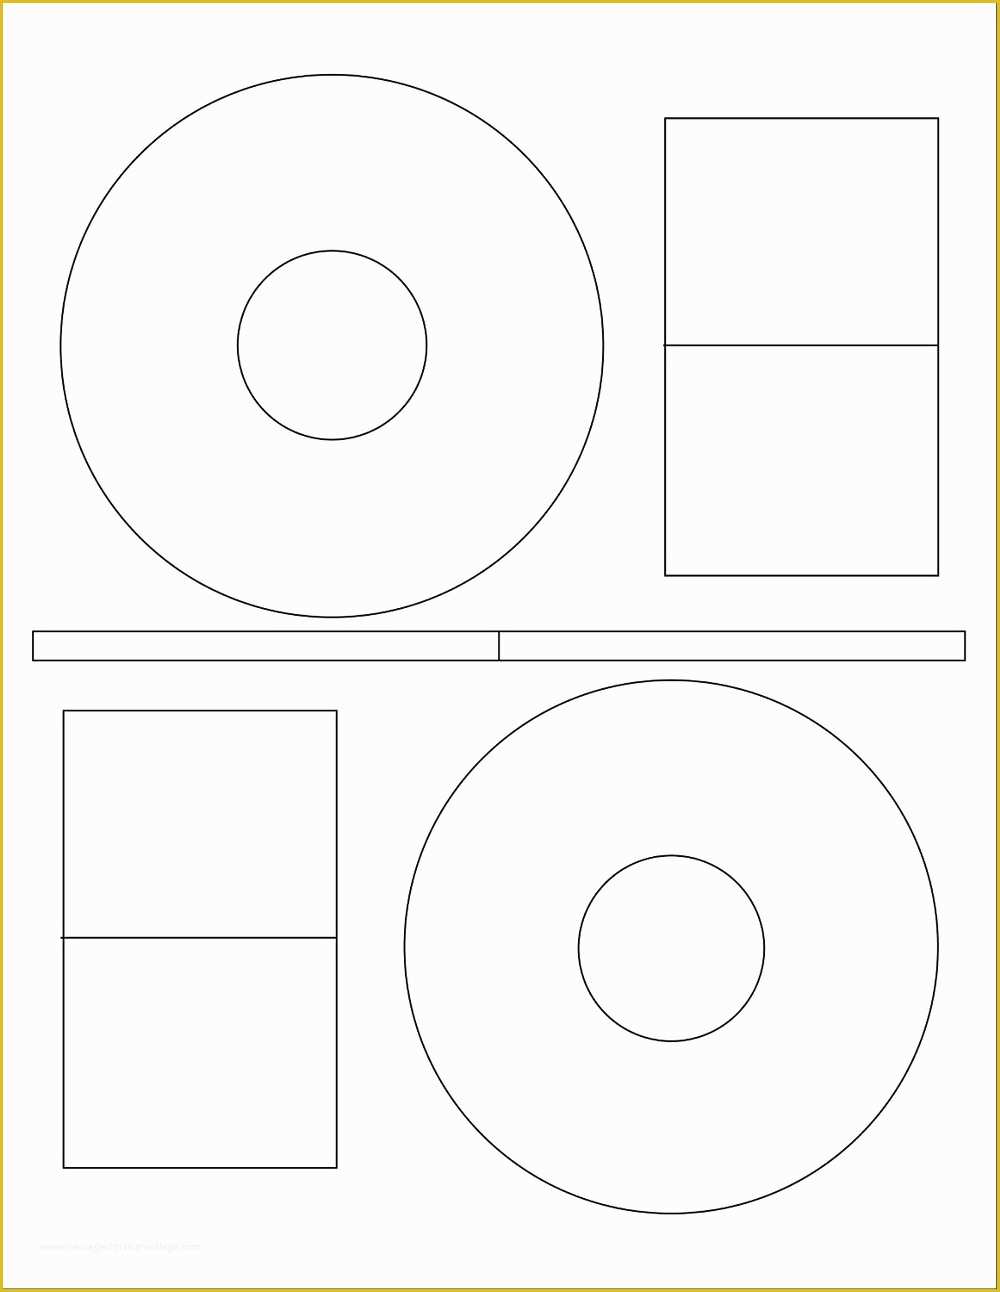 Free Avery Labels Templates Of Avery Divider Templates 12 Tab Elegant Avery 12 Tab